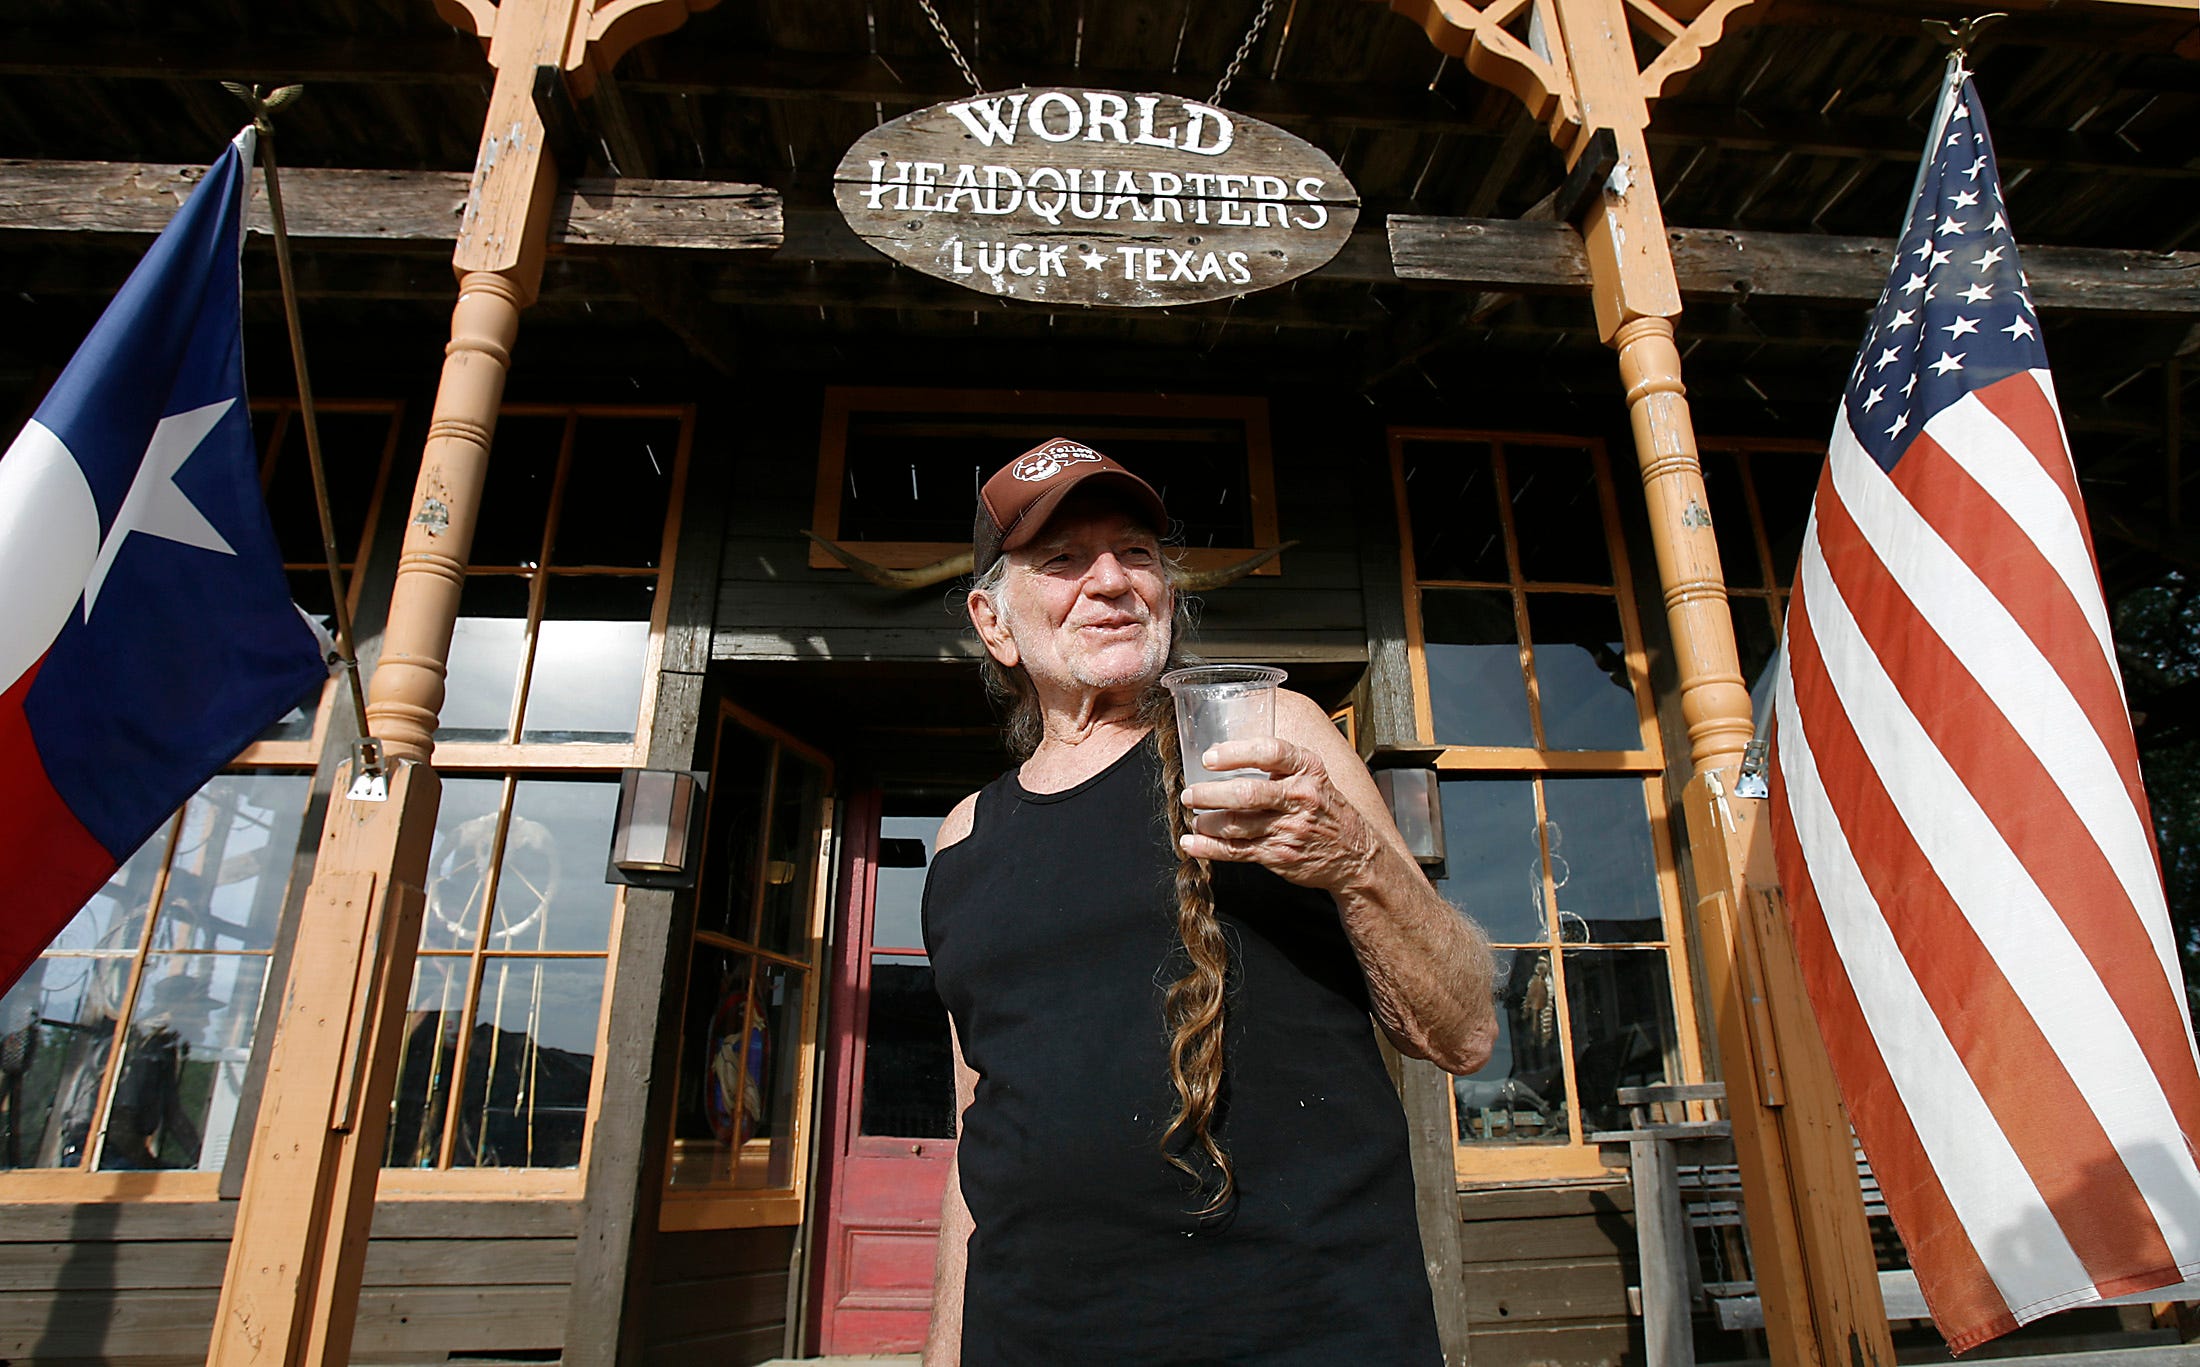 Willie Nelson smiles and poses with a cup of cold water from the Water from Air water cooler that he and Runtex owner, Paul Carrozo are teaming up to market during a visit to Nelson's World Headquarters on Friday, September 12, 2008.